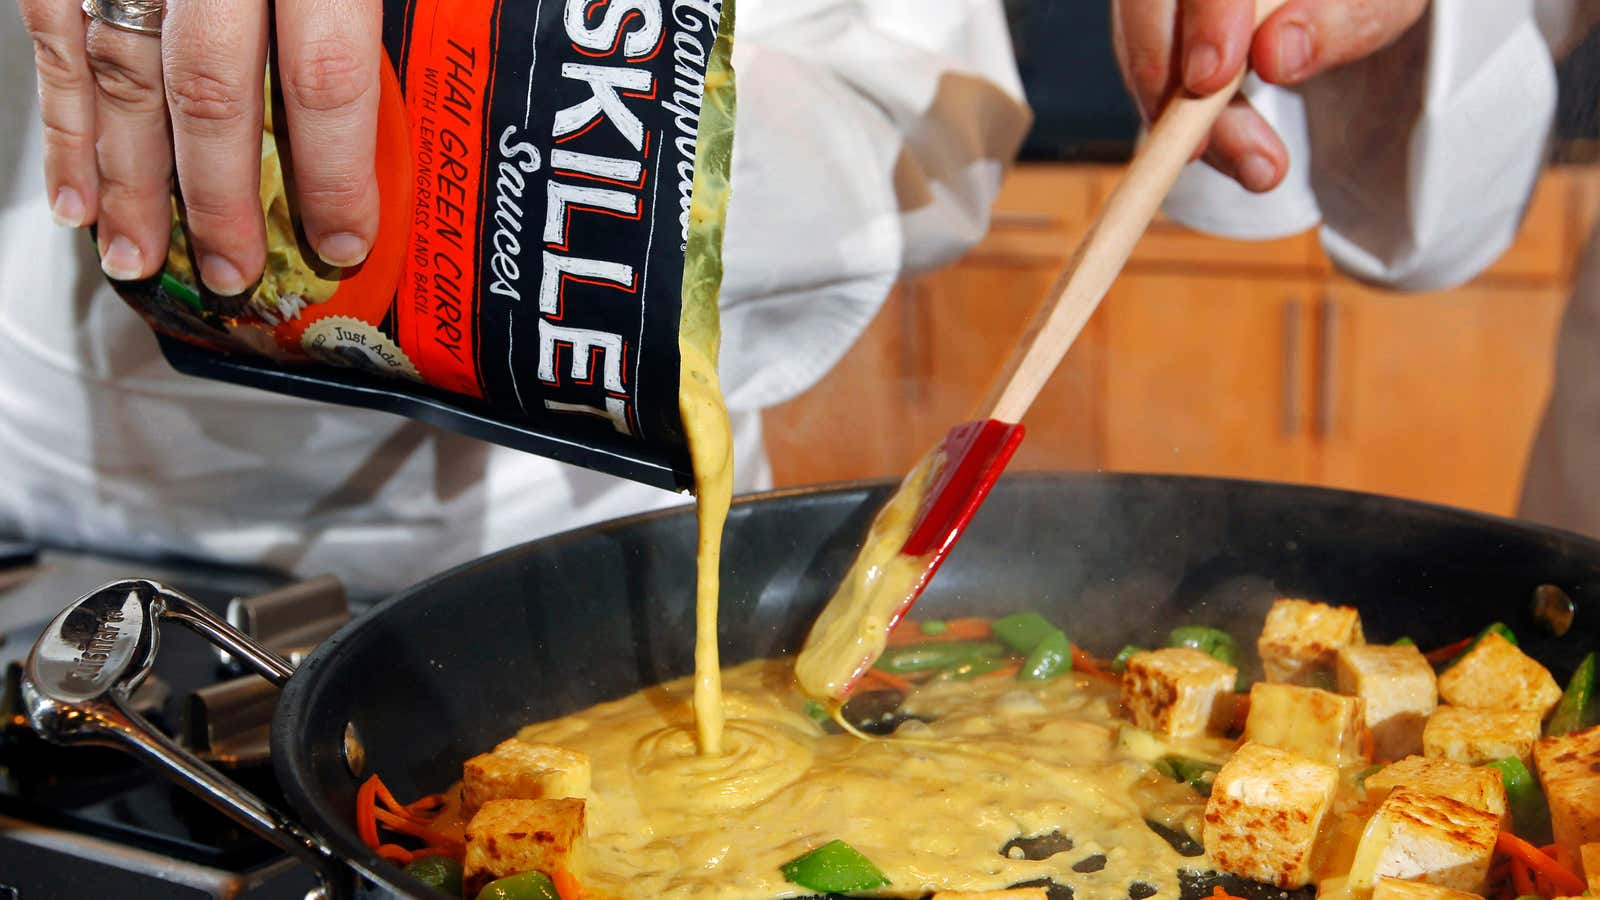 Campbell’s “Green Thai Curry Skillet sauce” is not likely to be robot-approved.